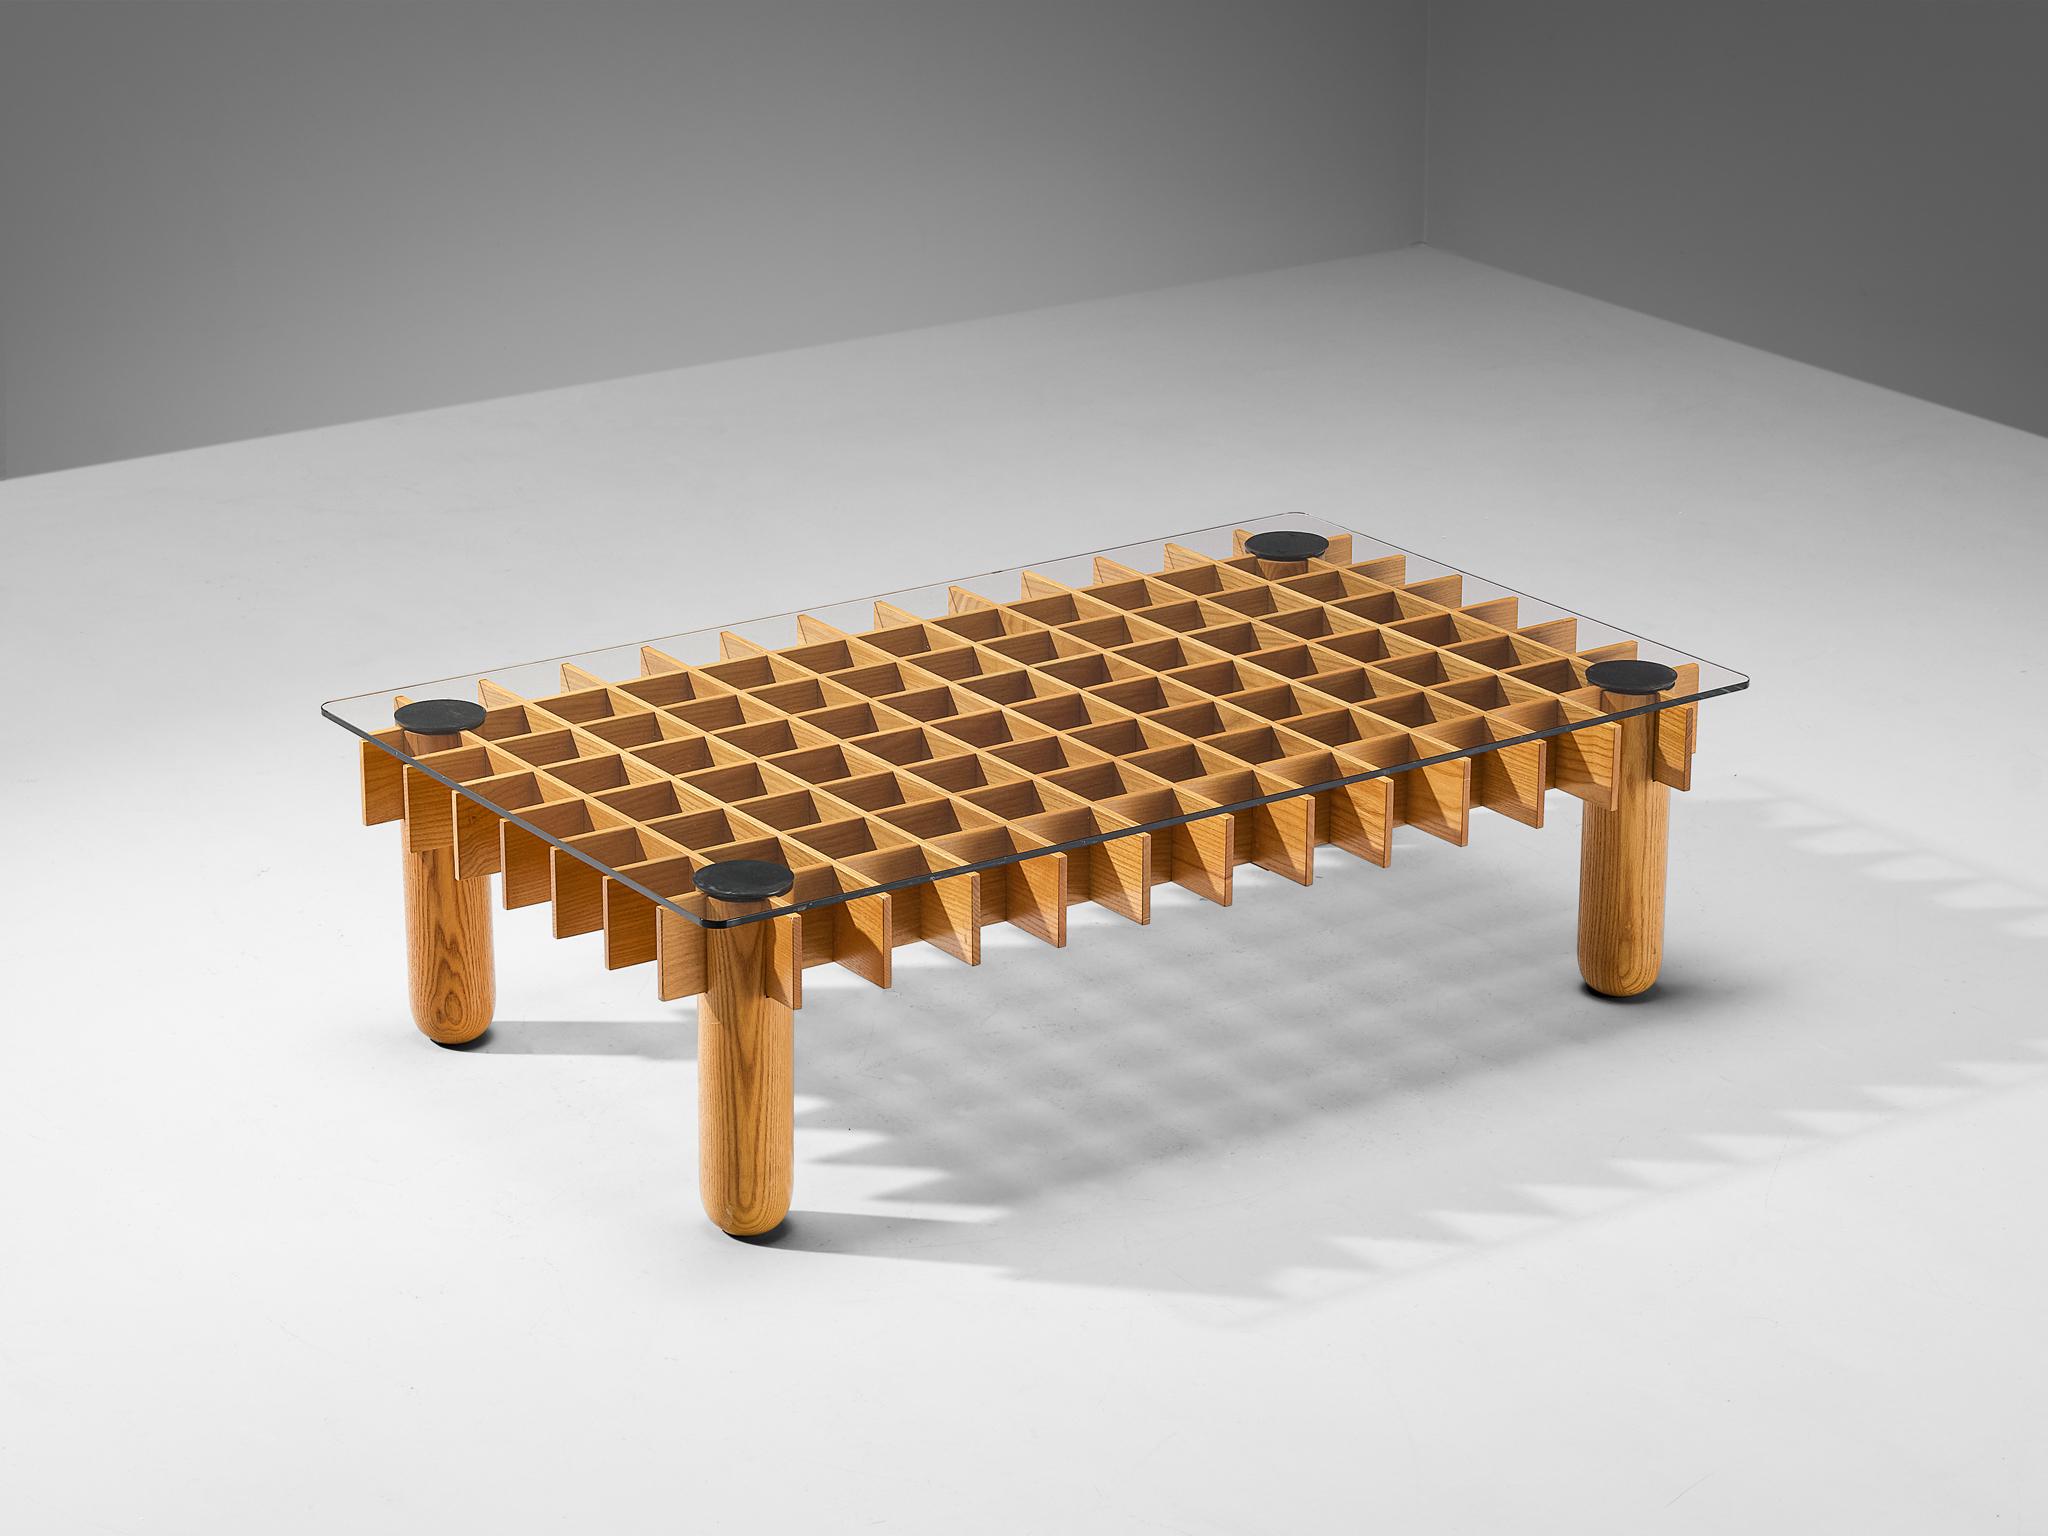 Coffee table, ash, rubber, glass, Italy, 1970s

This ash coffee table from Italy consists of a wooden grid, build up out of maple laths. Four solid round legs end up in four round ends. On top of the grid rests a glass top. The construction of the